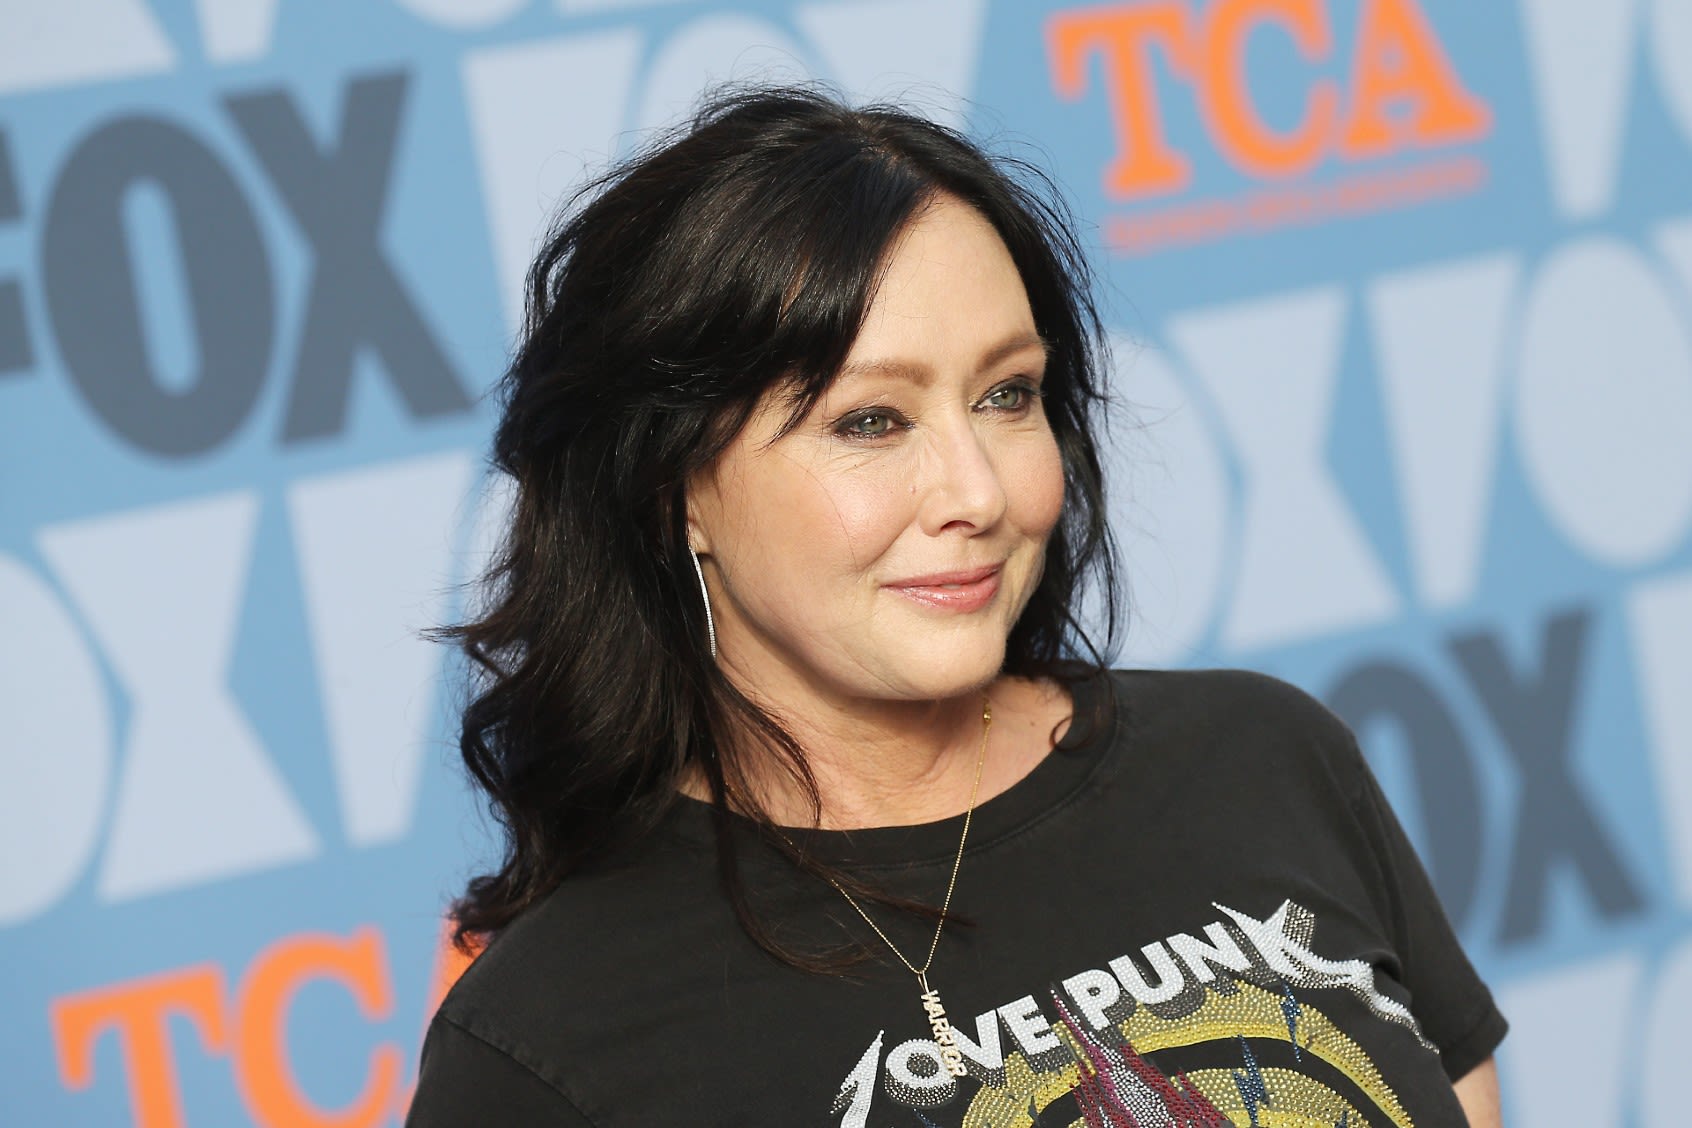 Shannen Doherty dies at 53, after lengthy battle with cancer